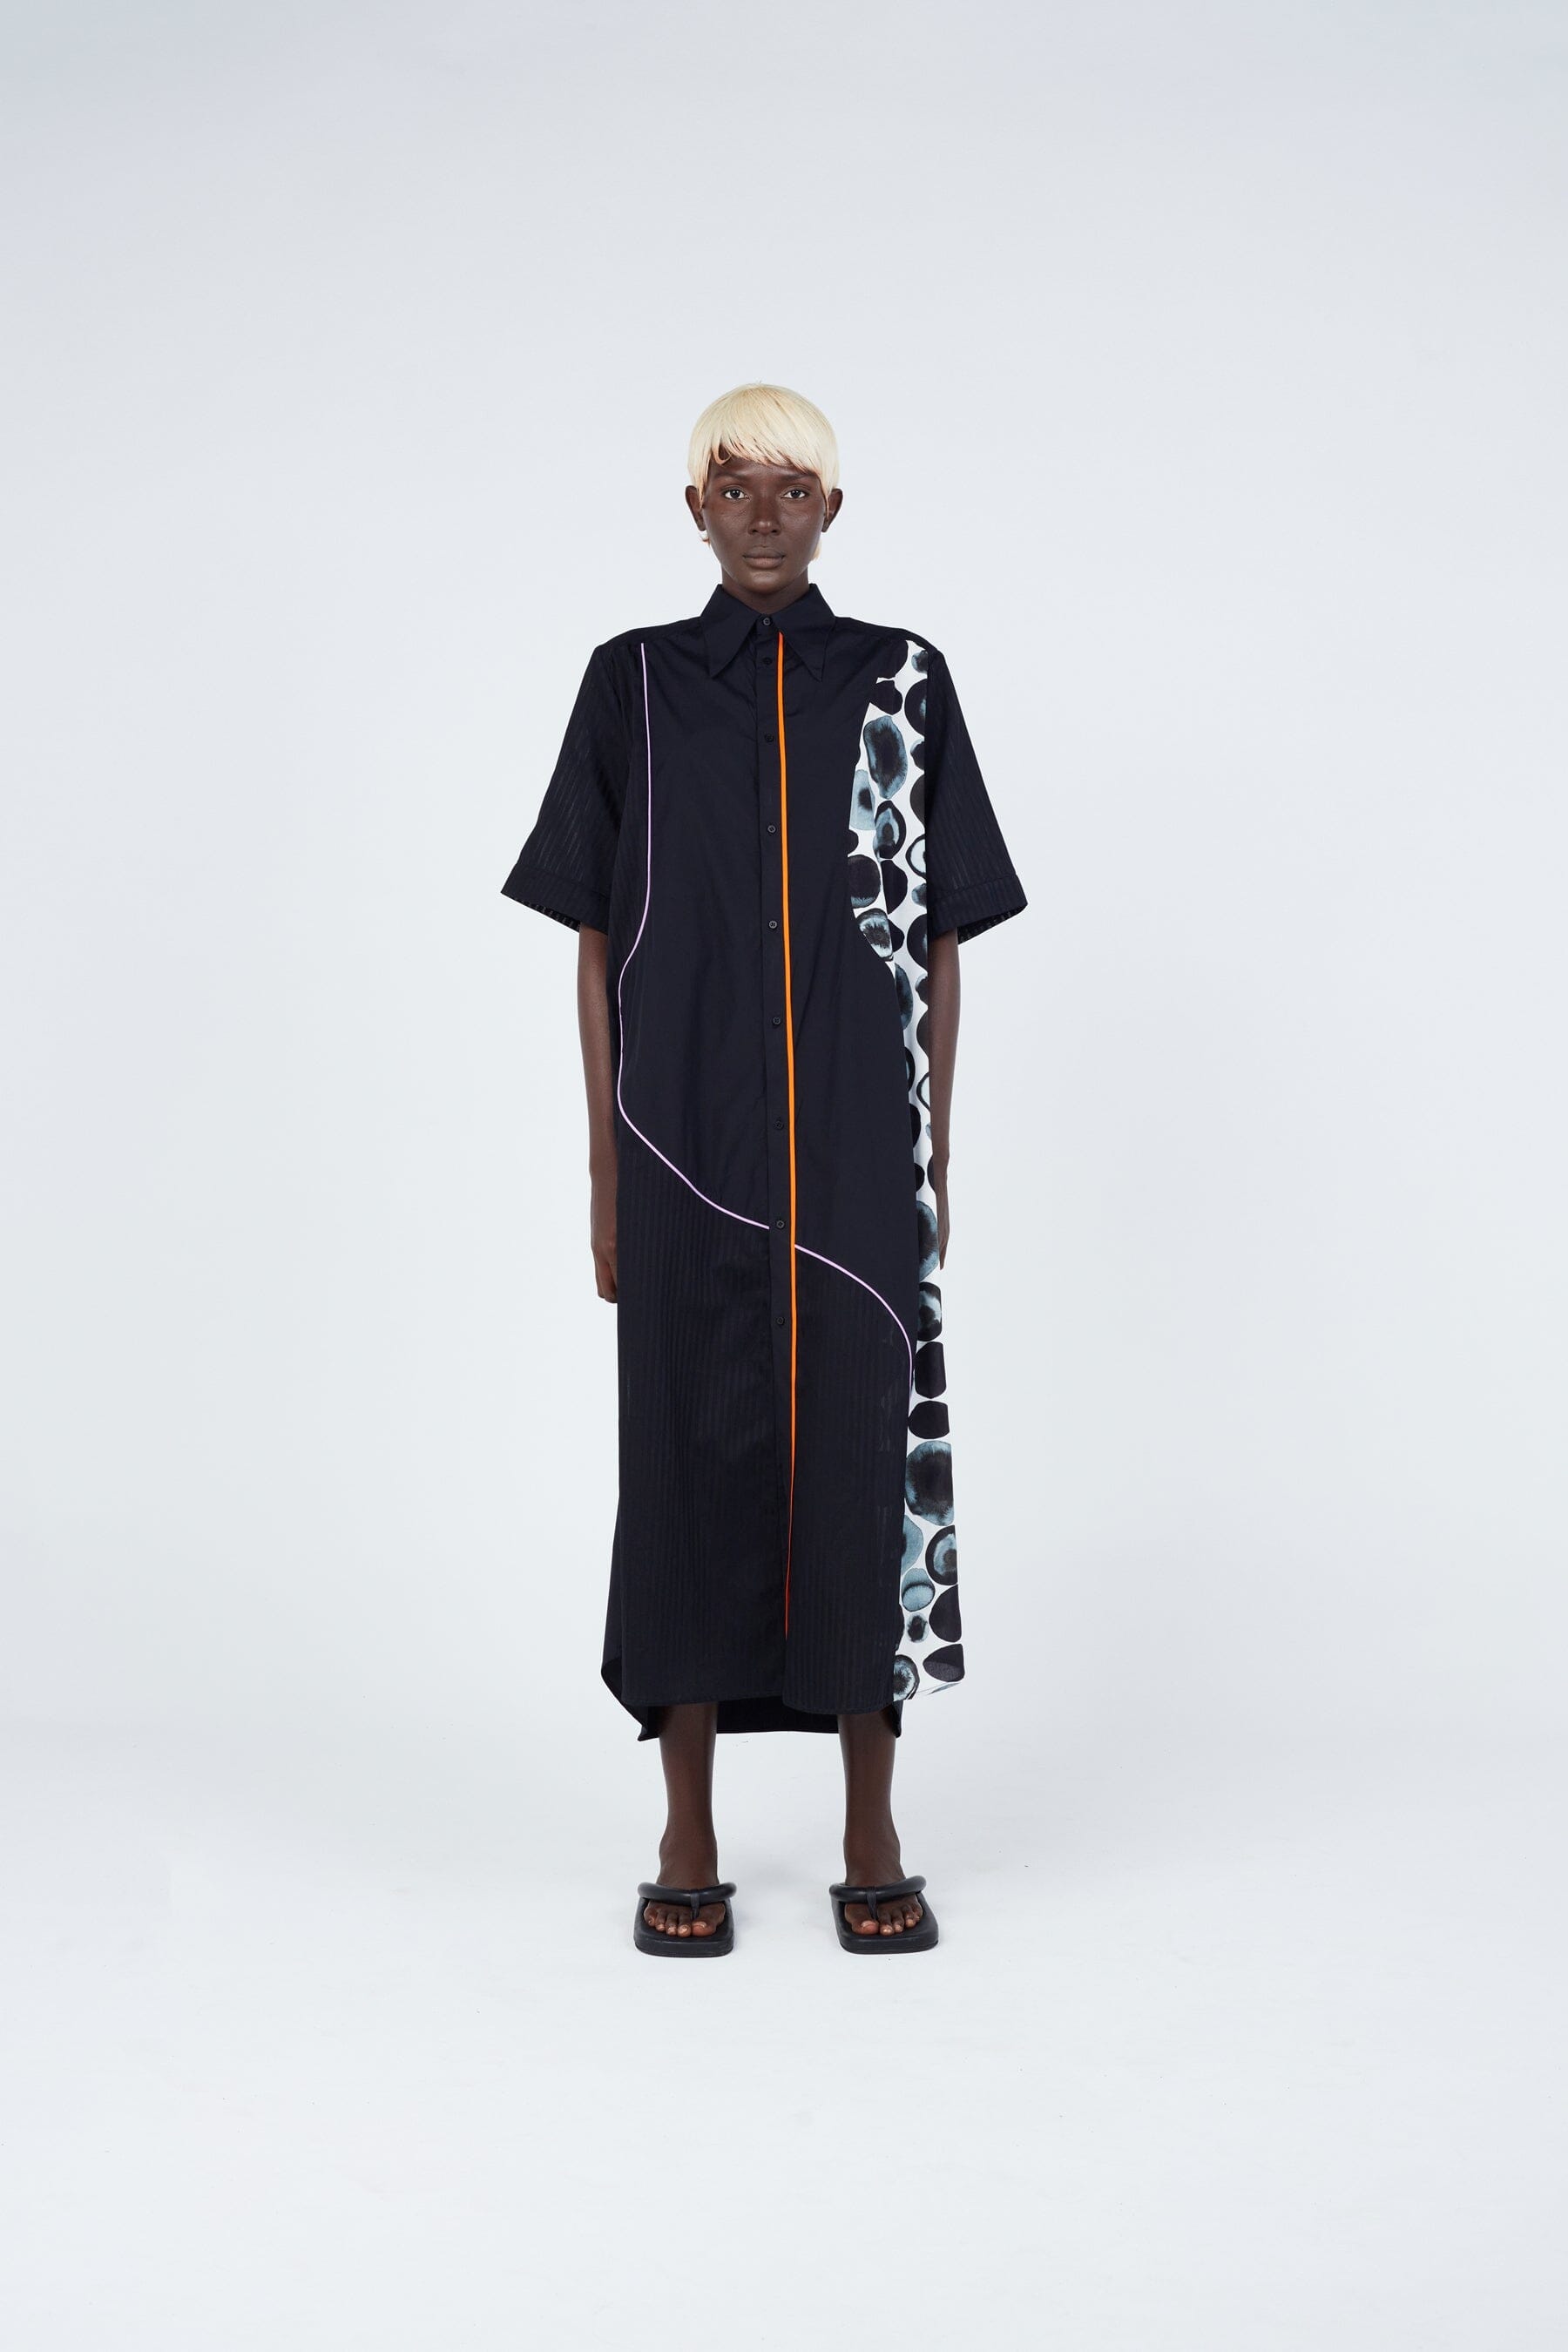 Abstractions Shirt-Dress Dress New LaurenceAirline Womens 